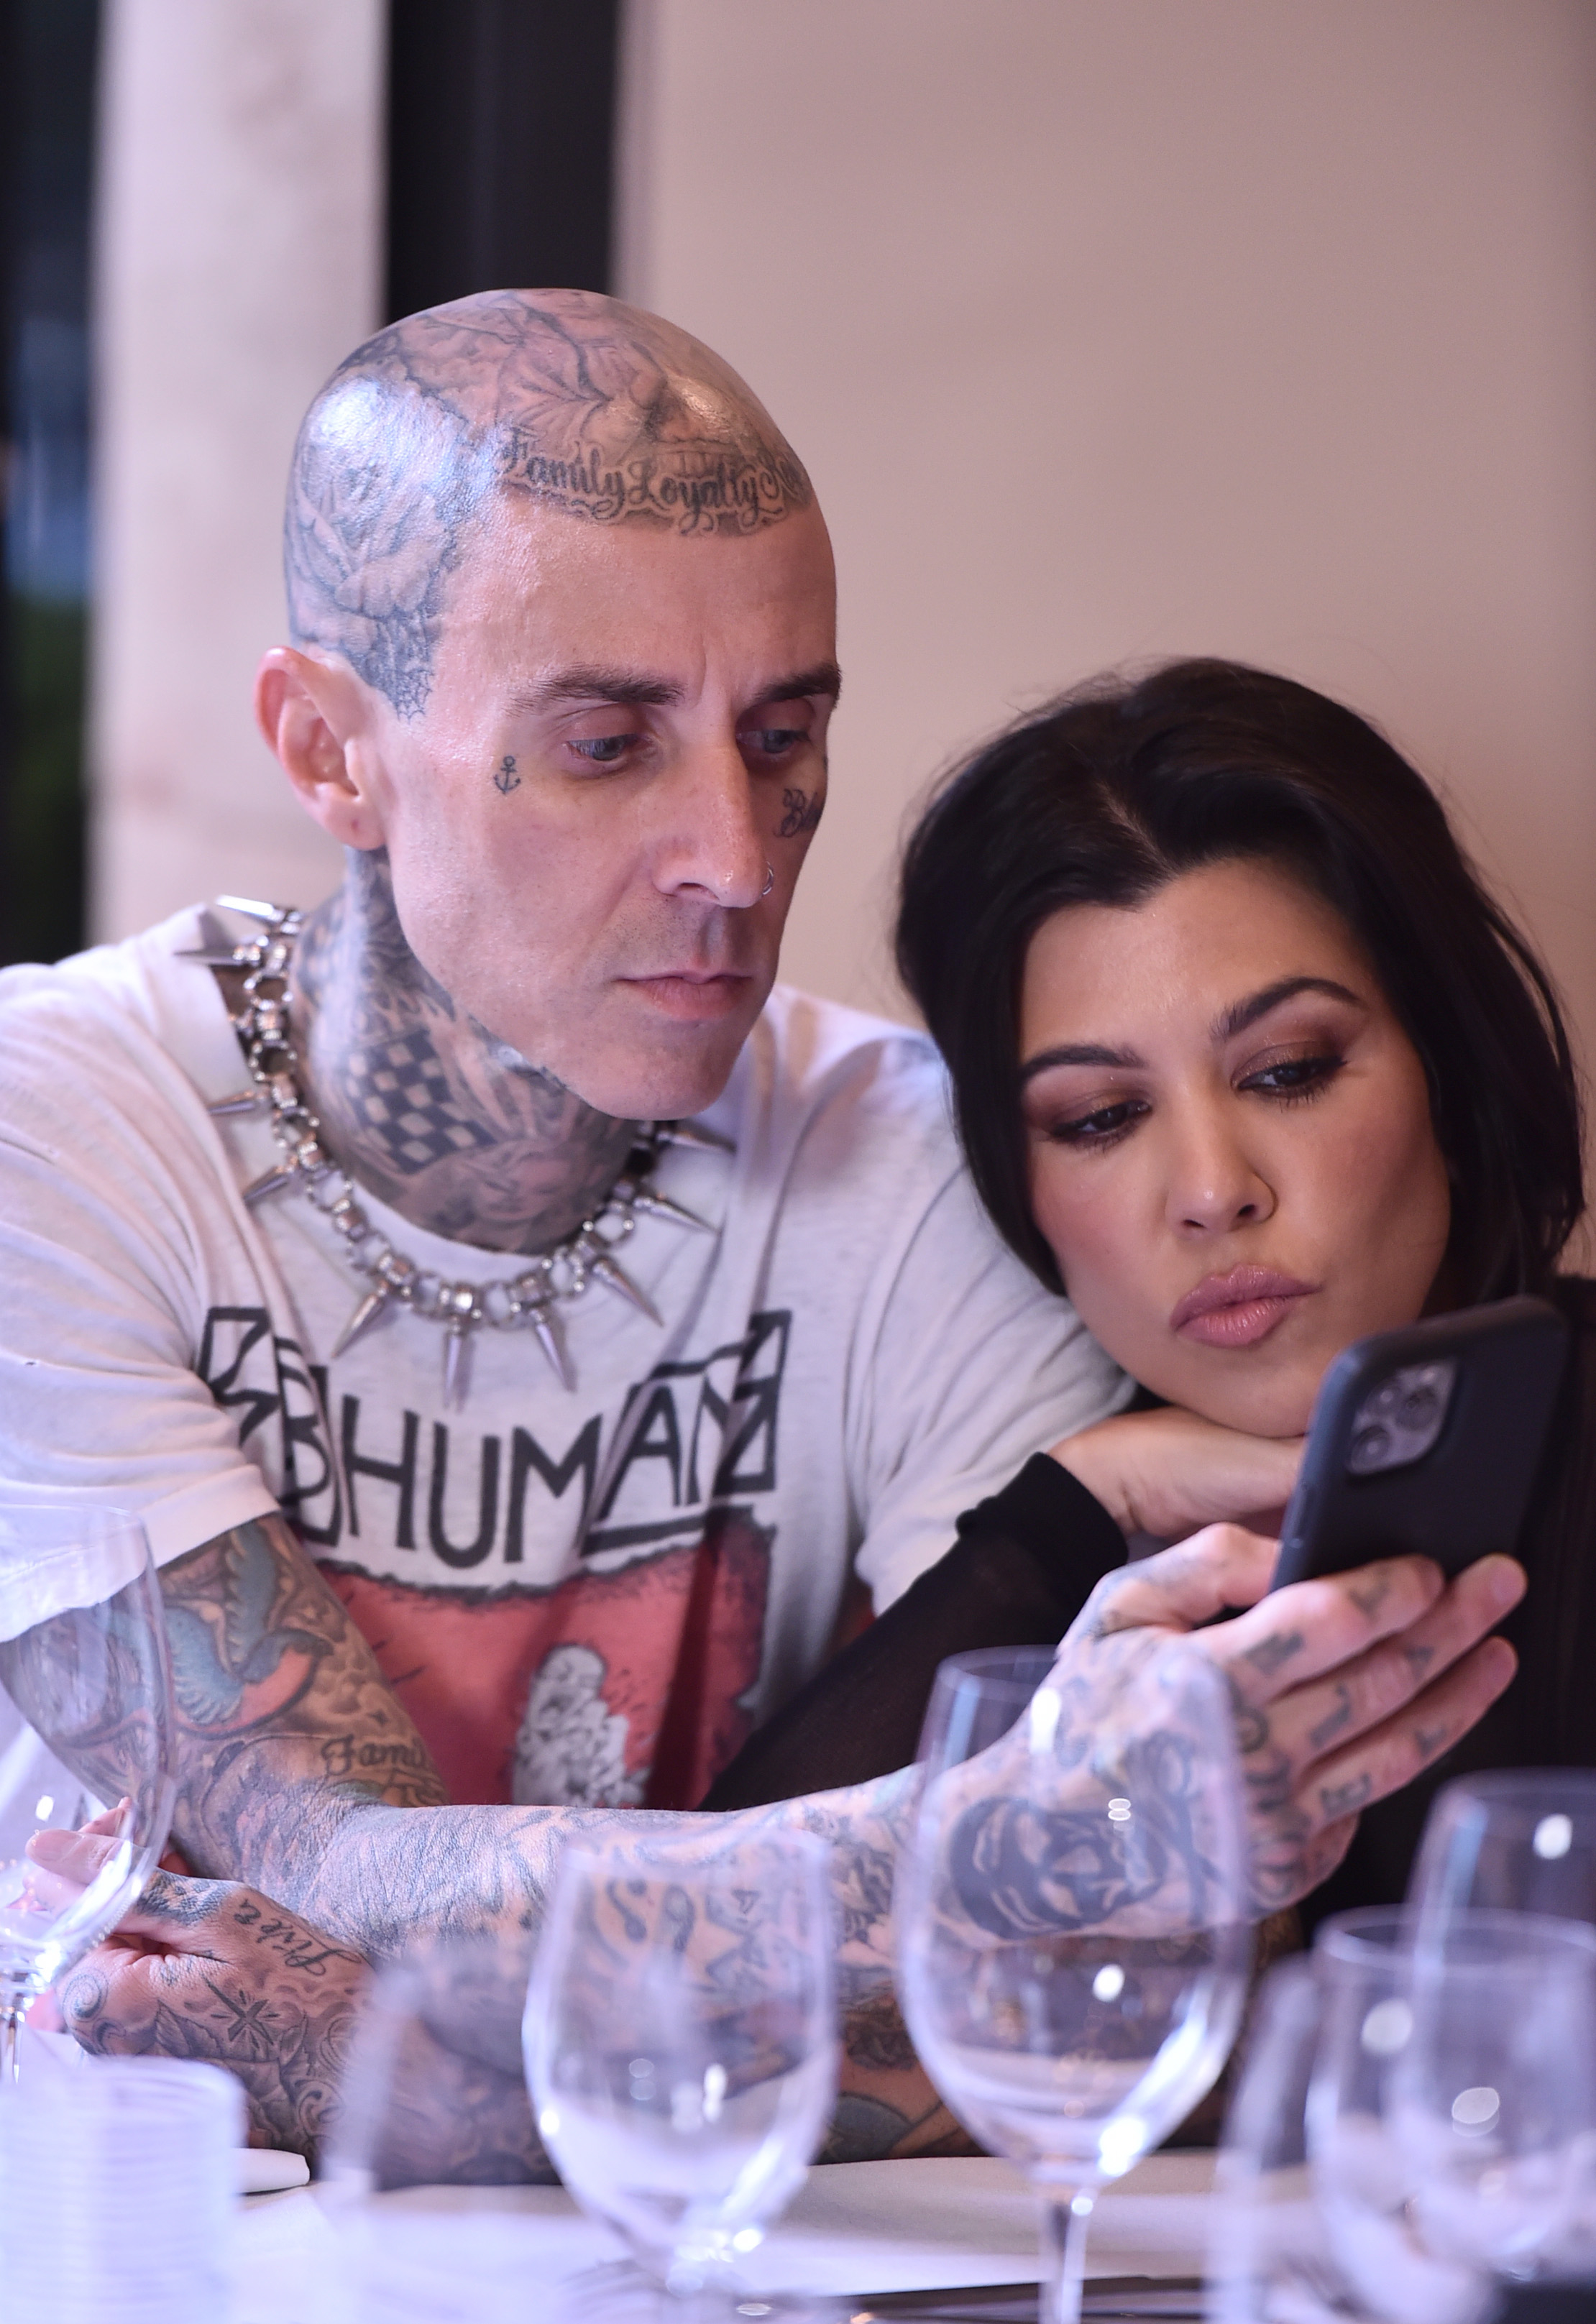 travis and kourtney at dinner looking at a phone